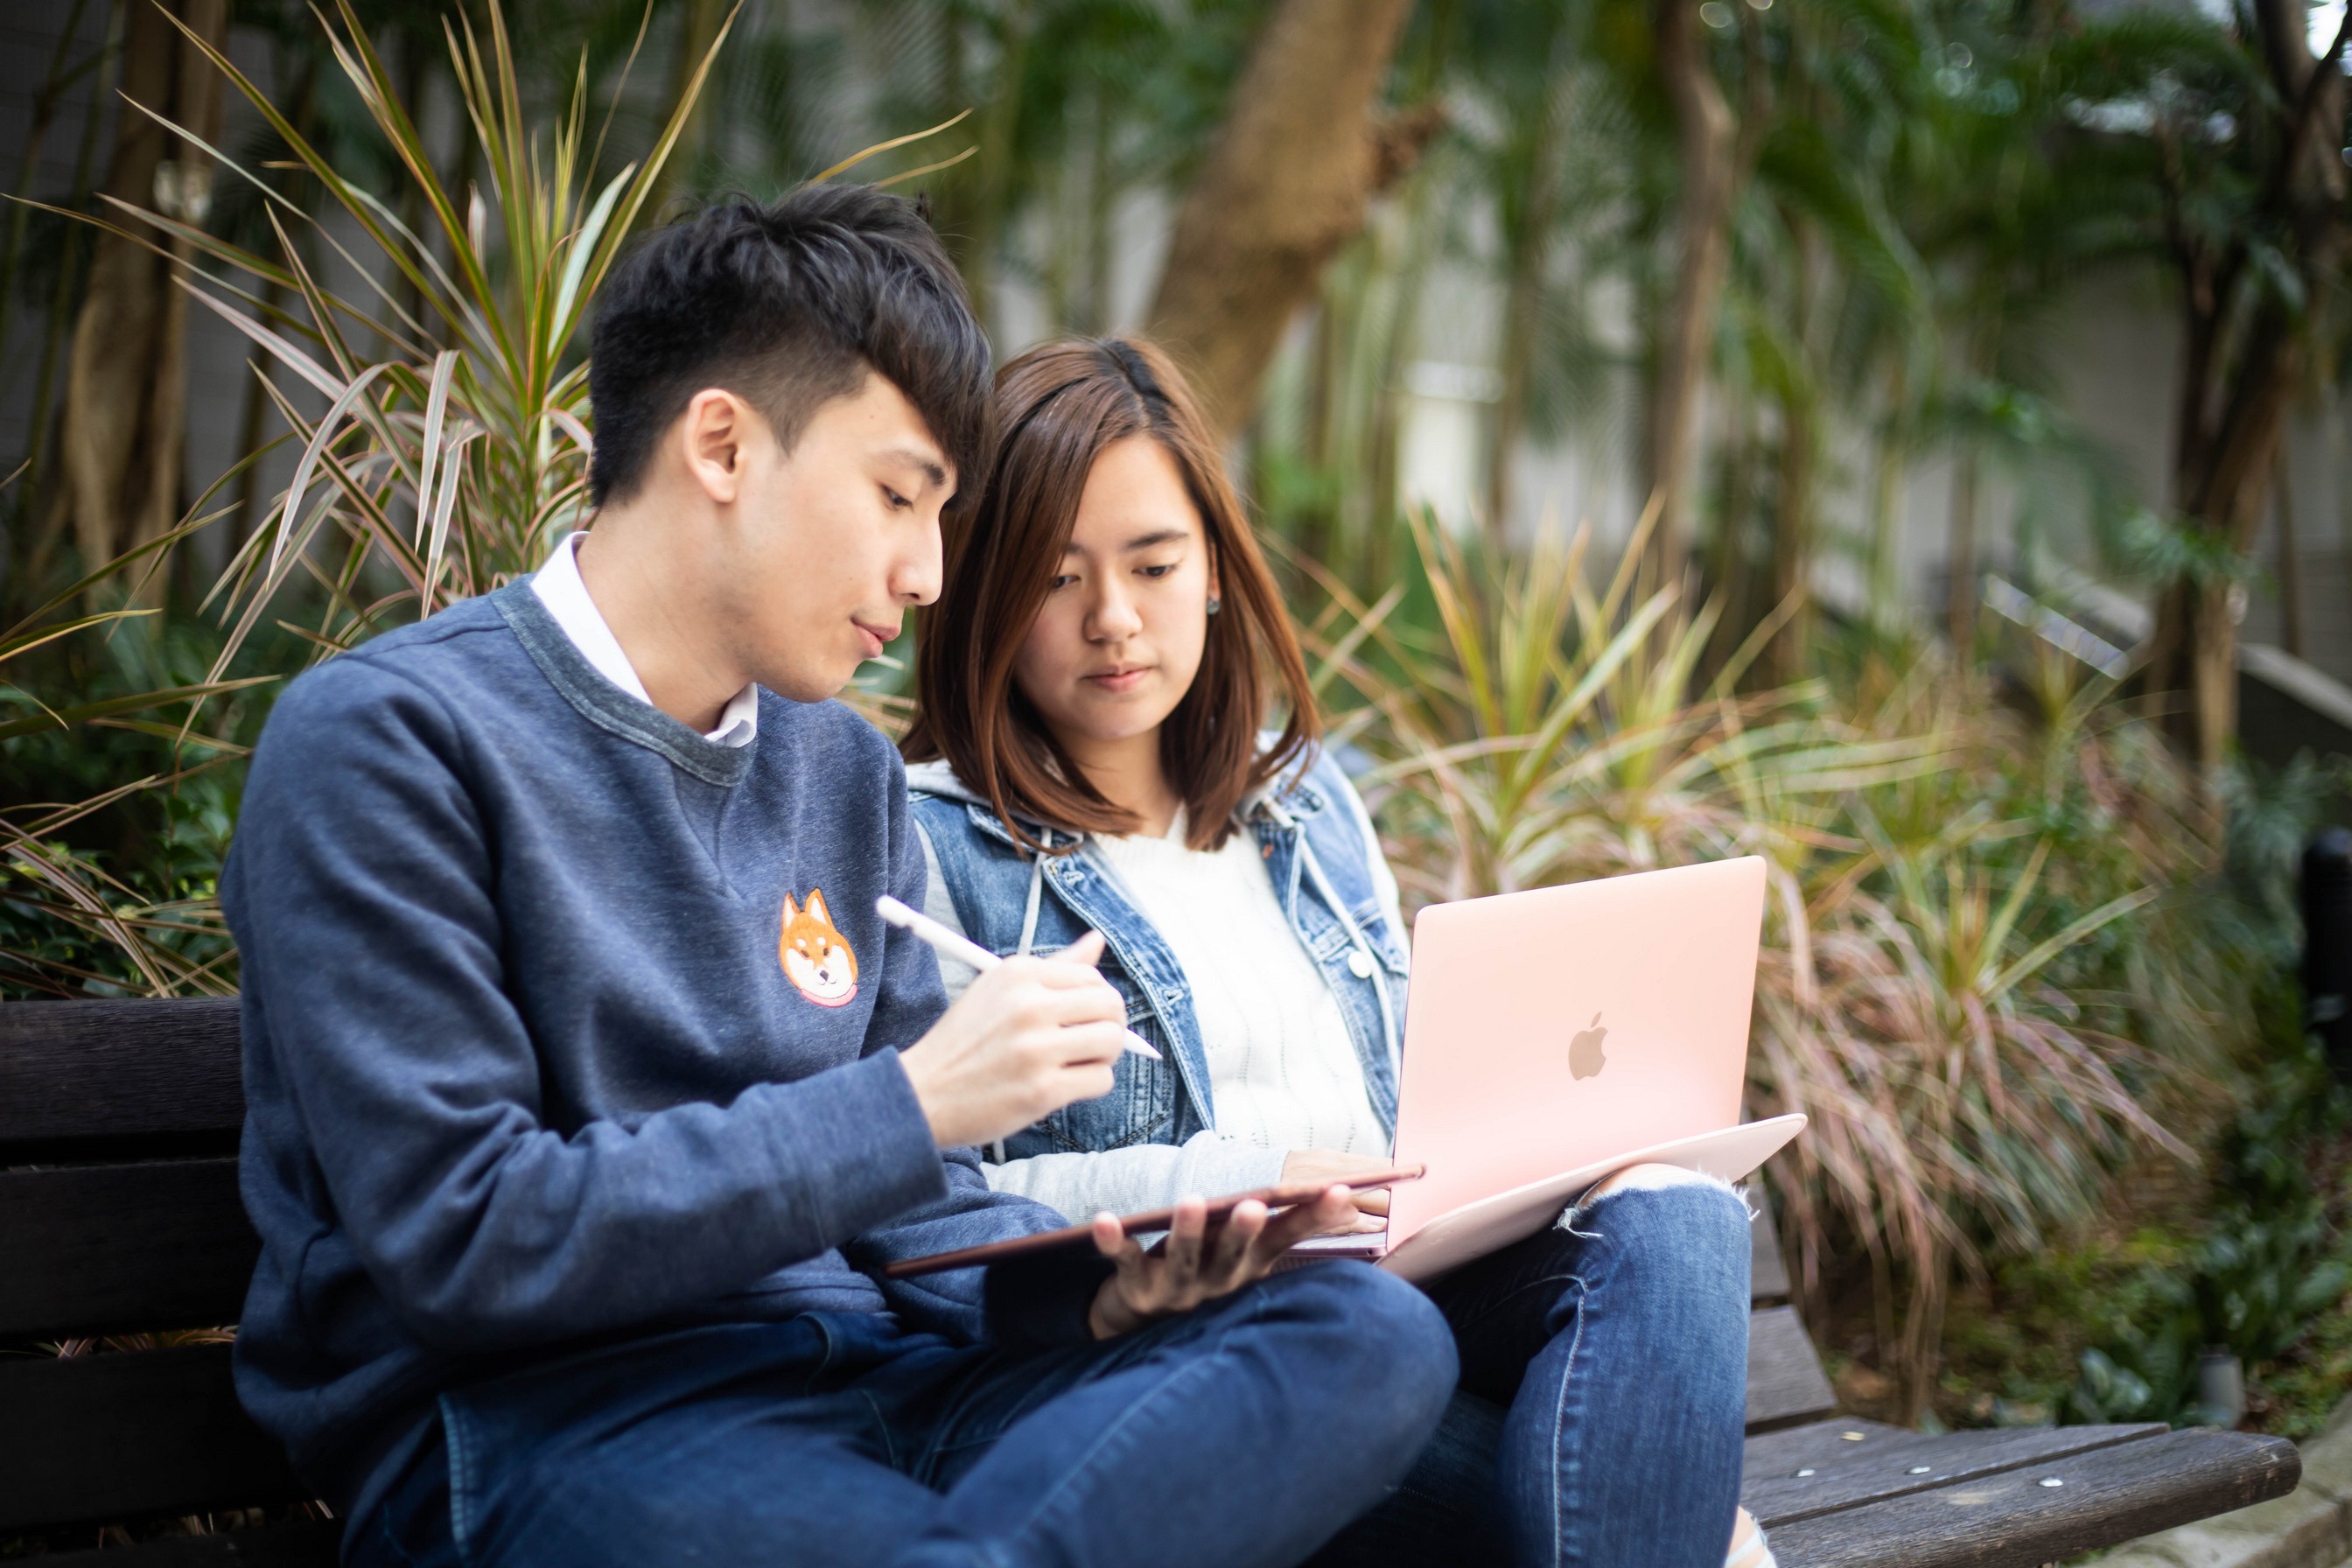 Two students in a discussion on a bench.